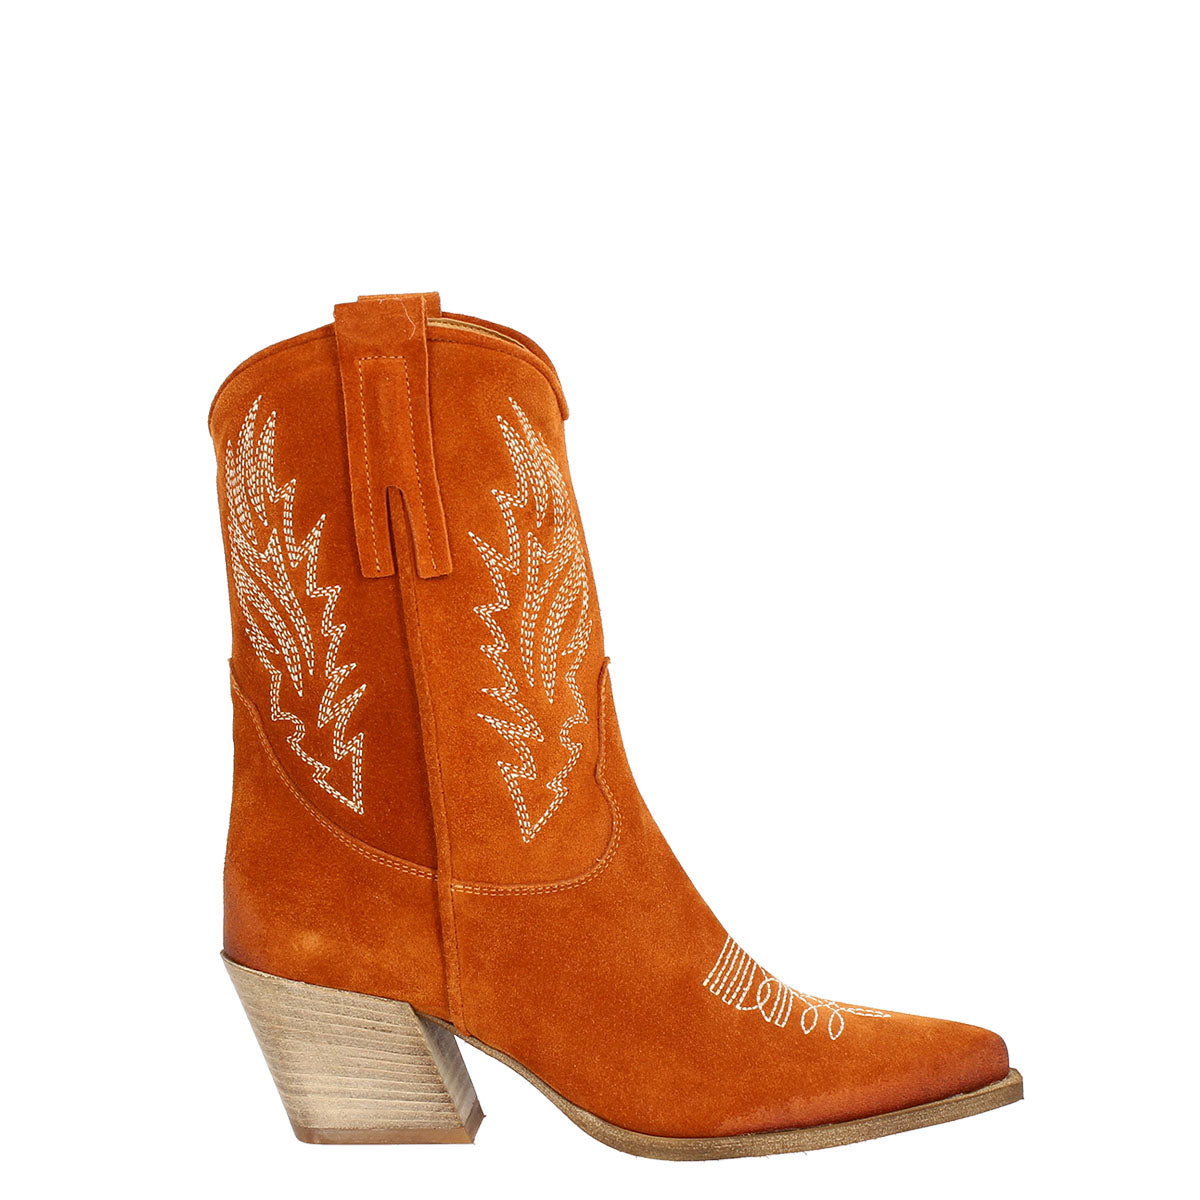 Women's Texan boot in orange suede with embroidery.